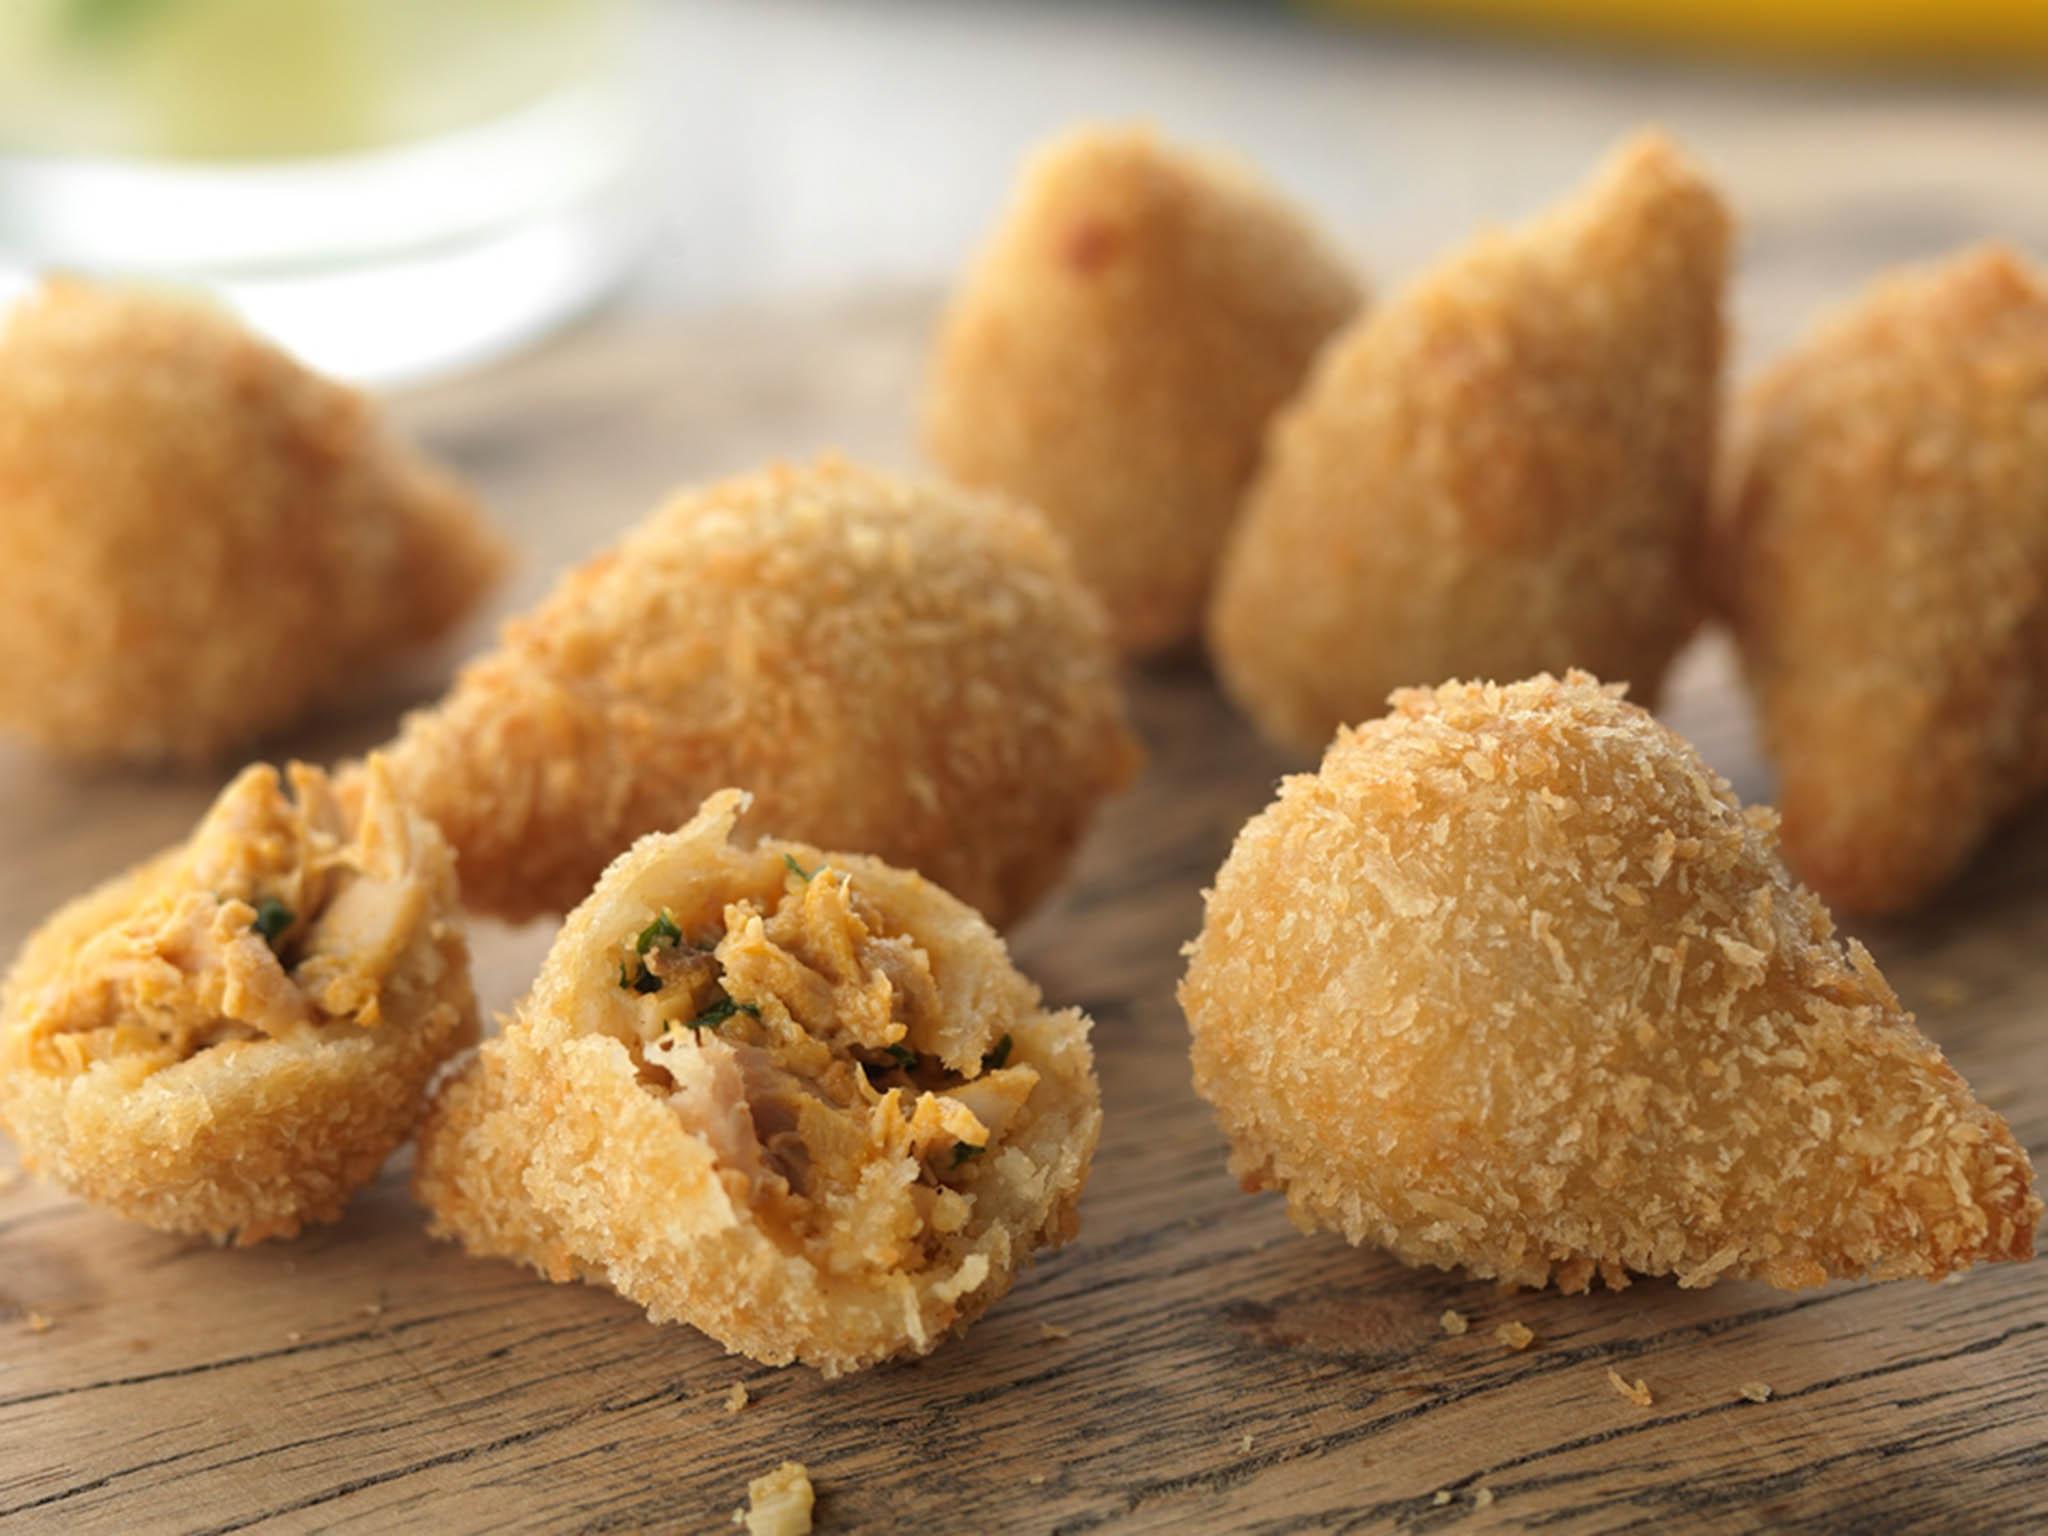 Brazilians love their deep fried food and chicken coxinha, filled with chicken and cheese, are no exception